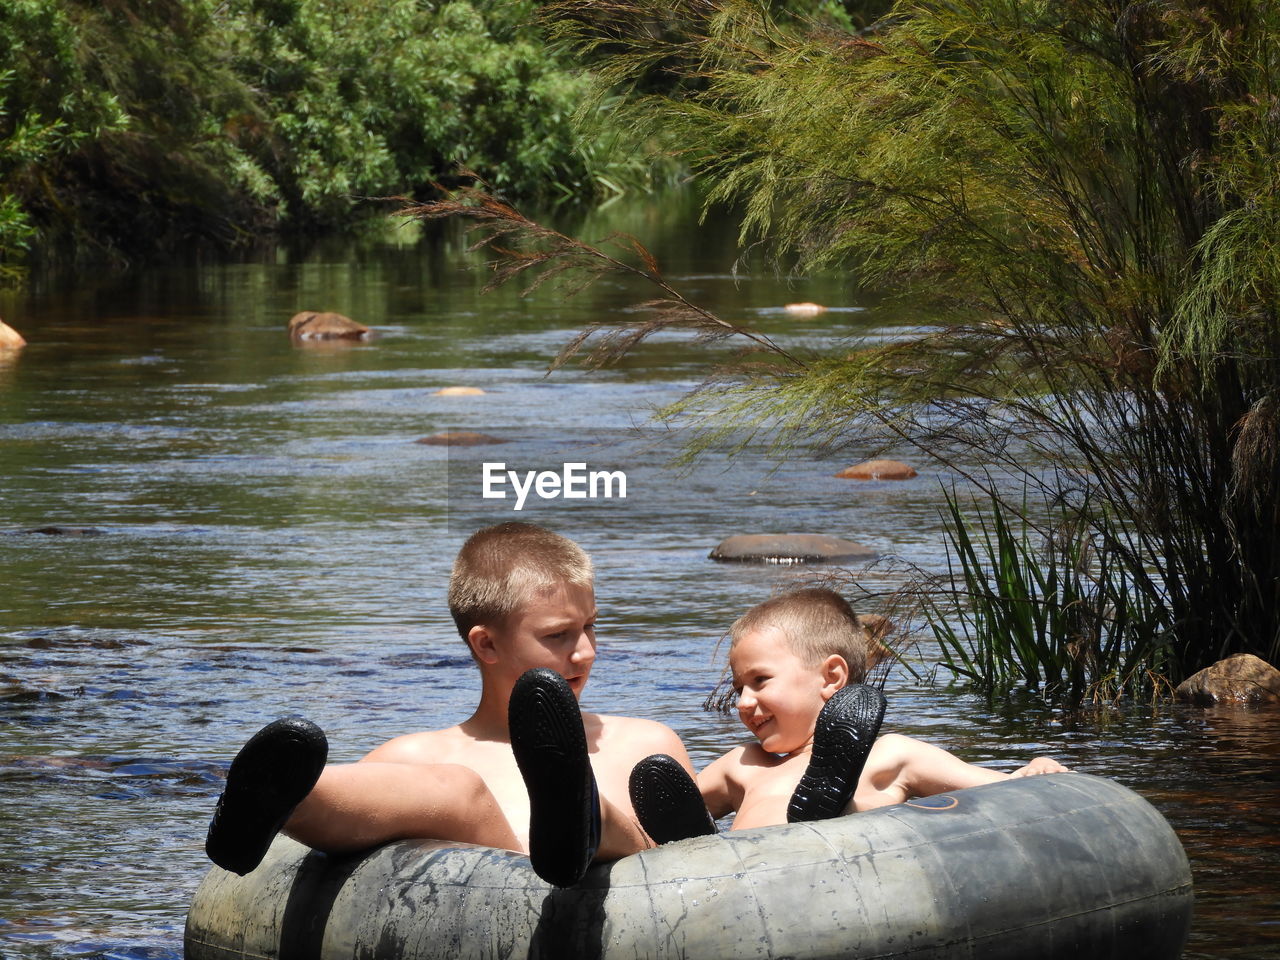 Shirtless brothers floating on inflatable ring over river against trees